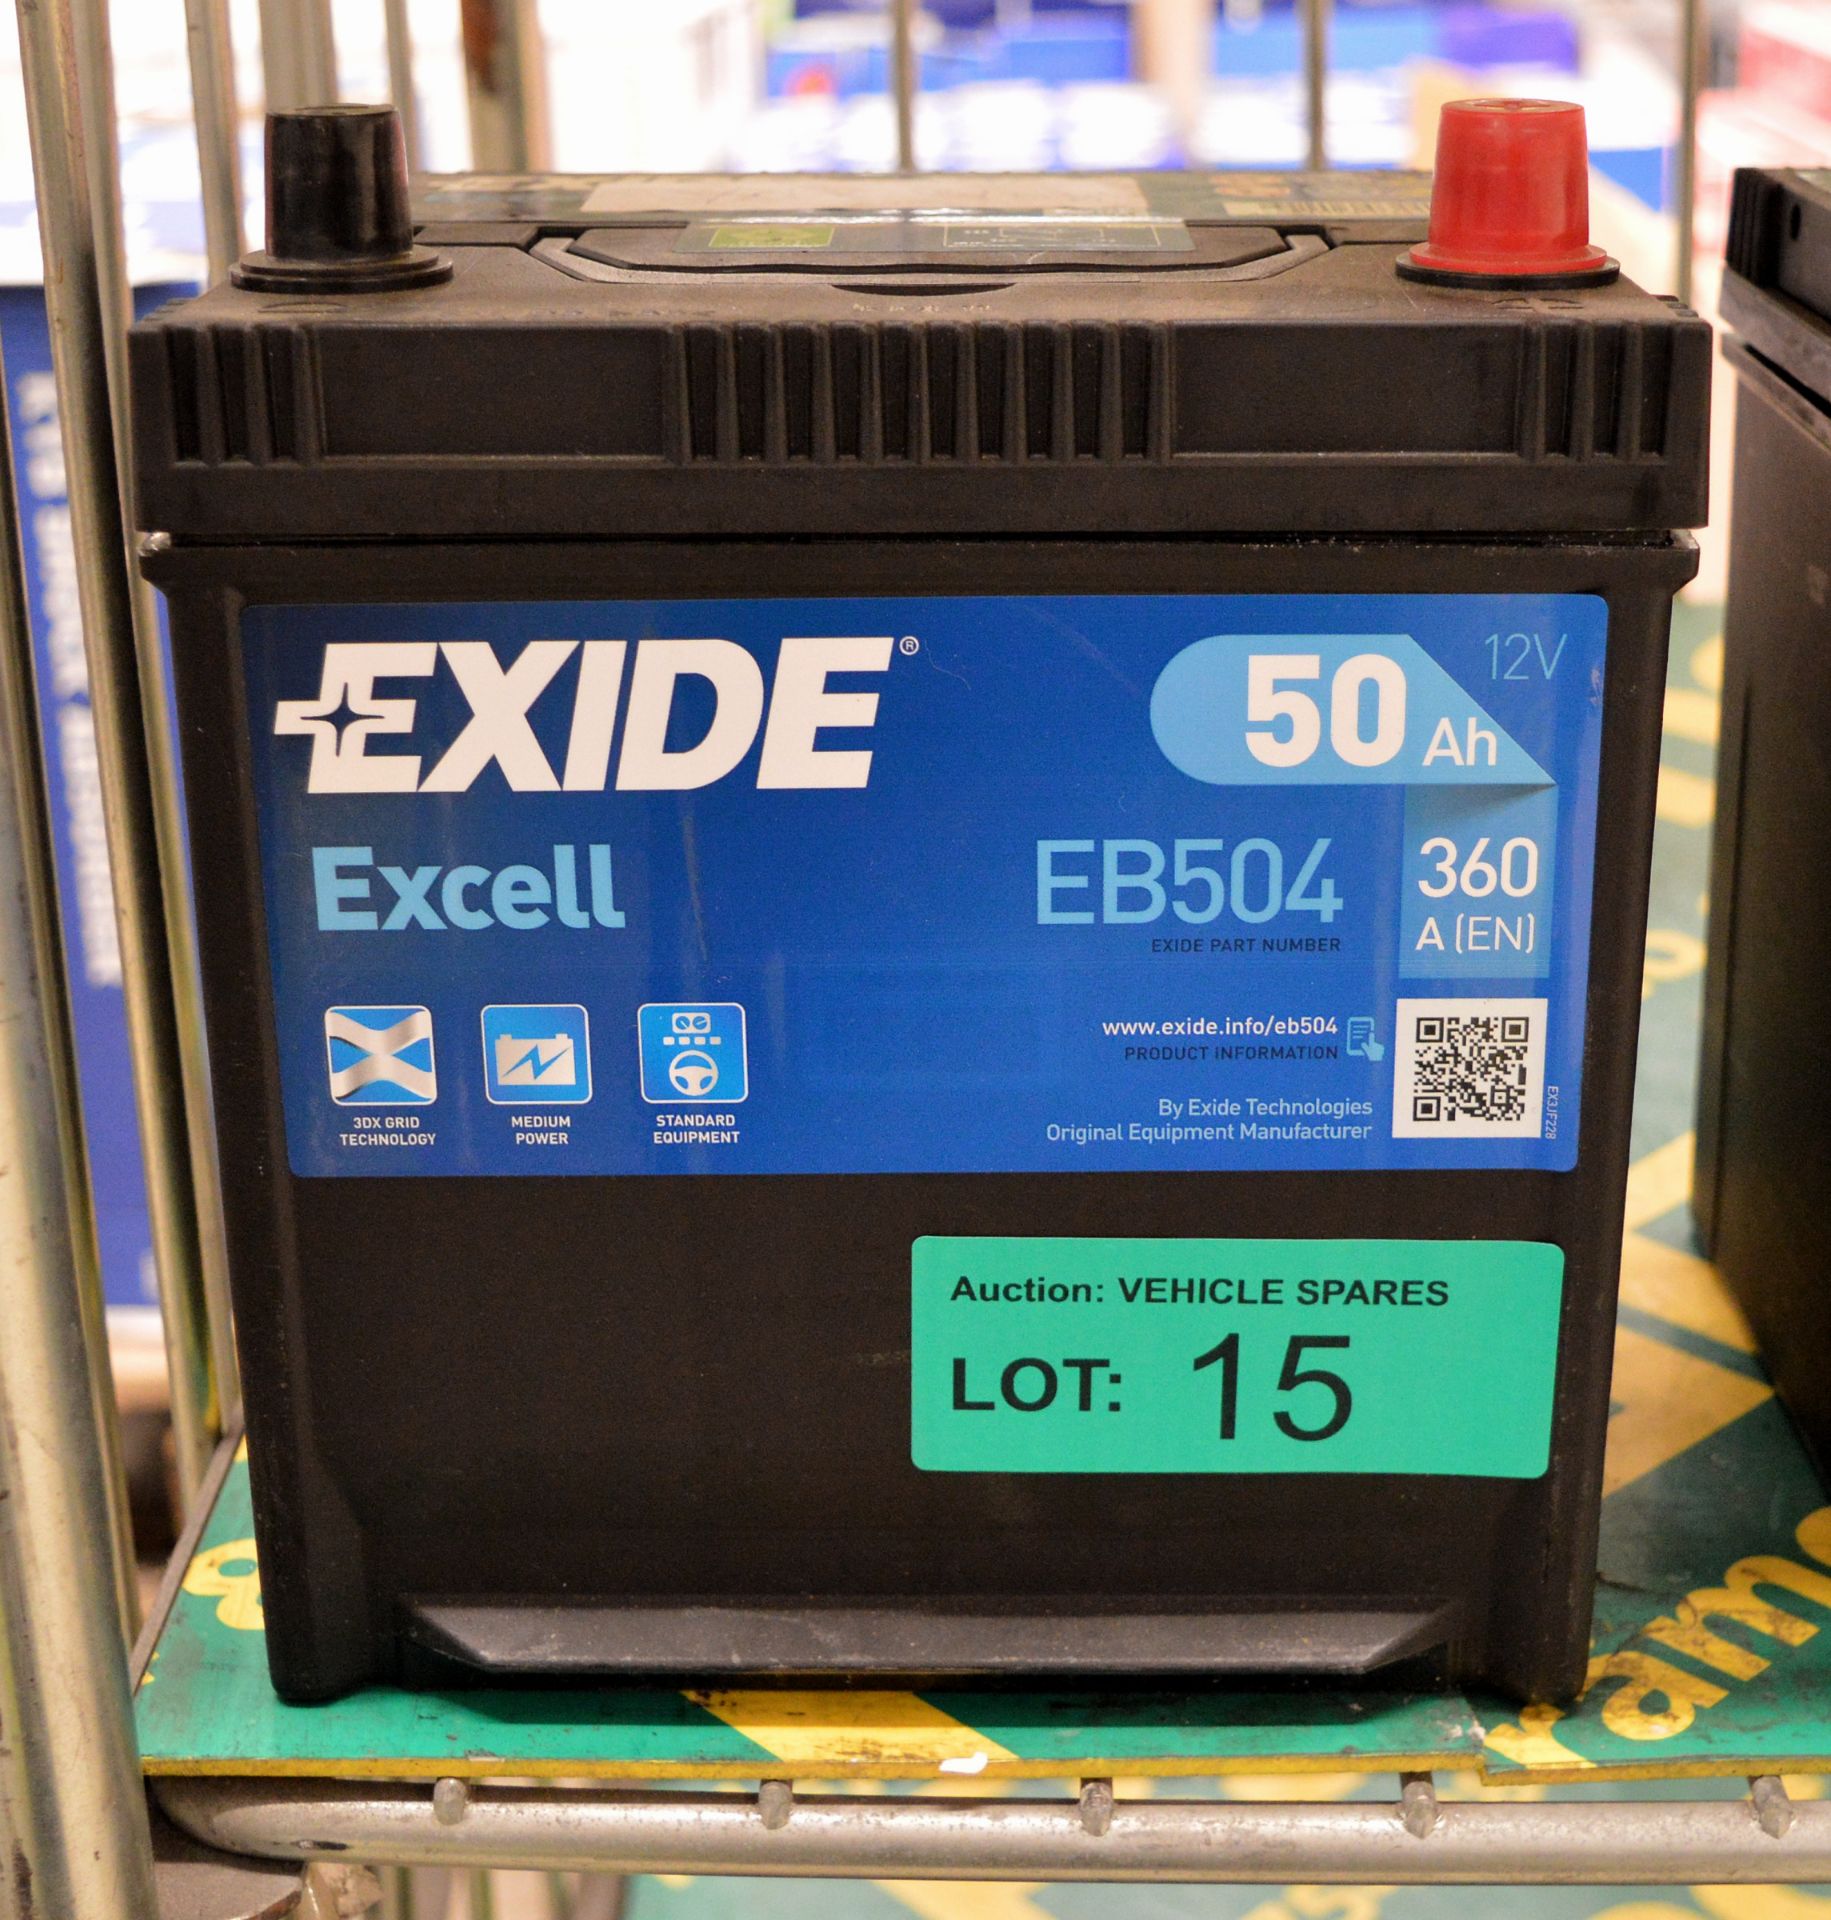 Exide Excell EB504 12V 50Ah 360A Battery